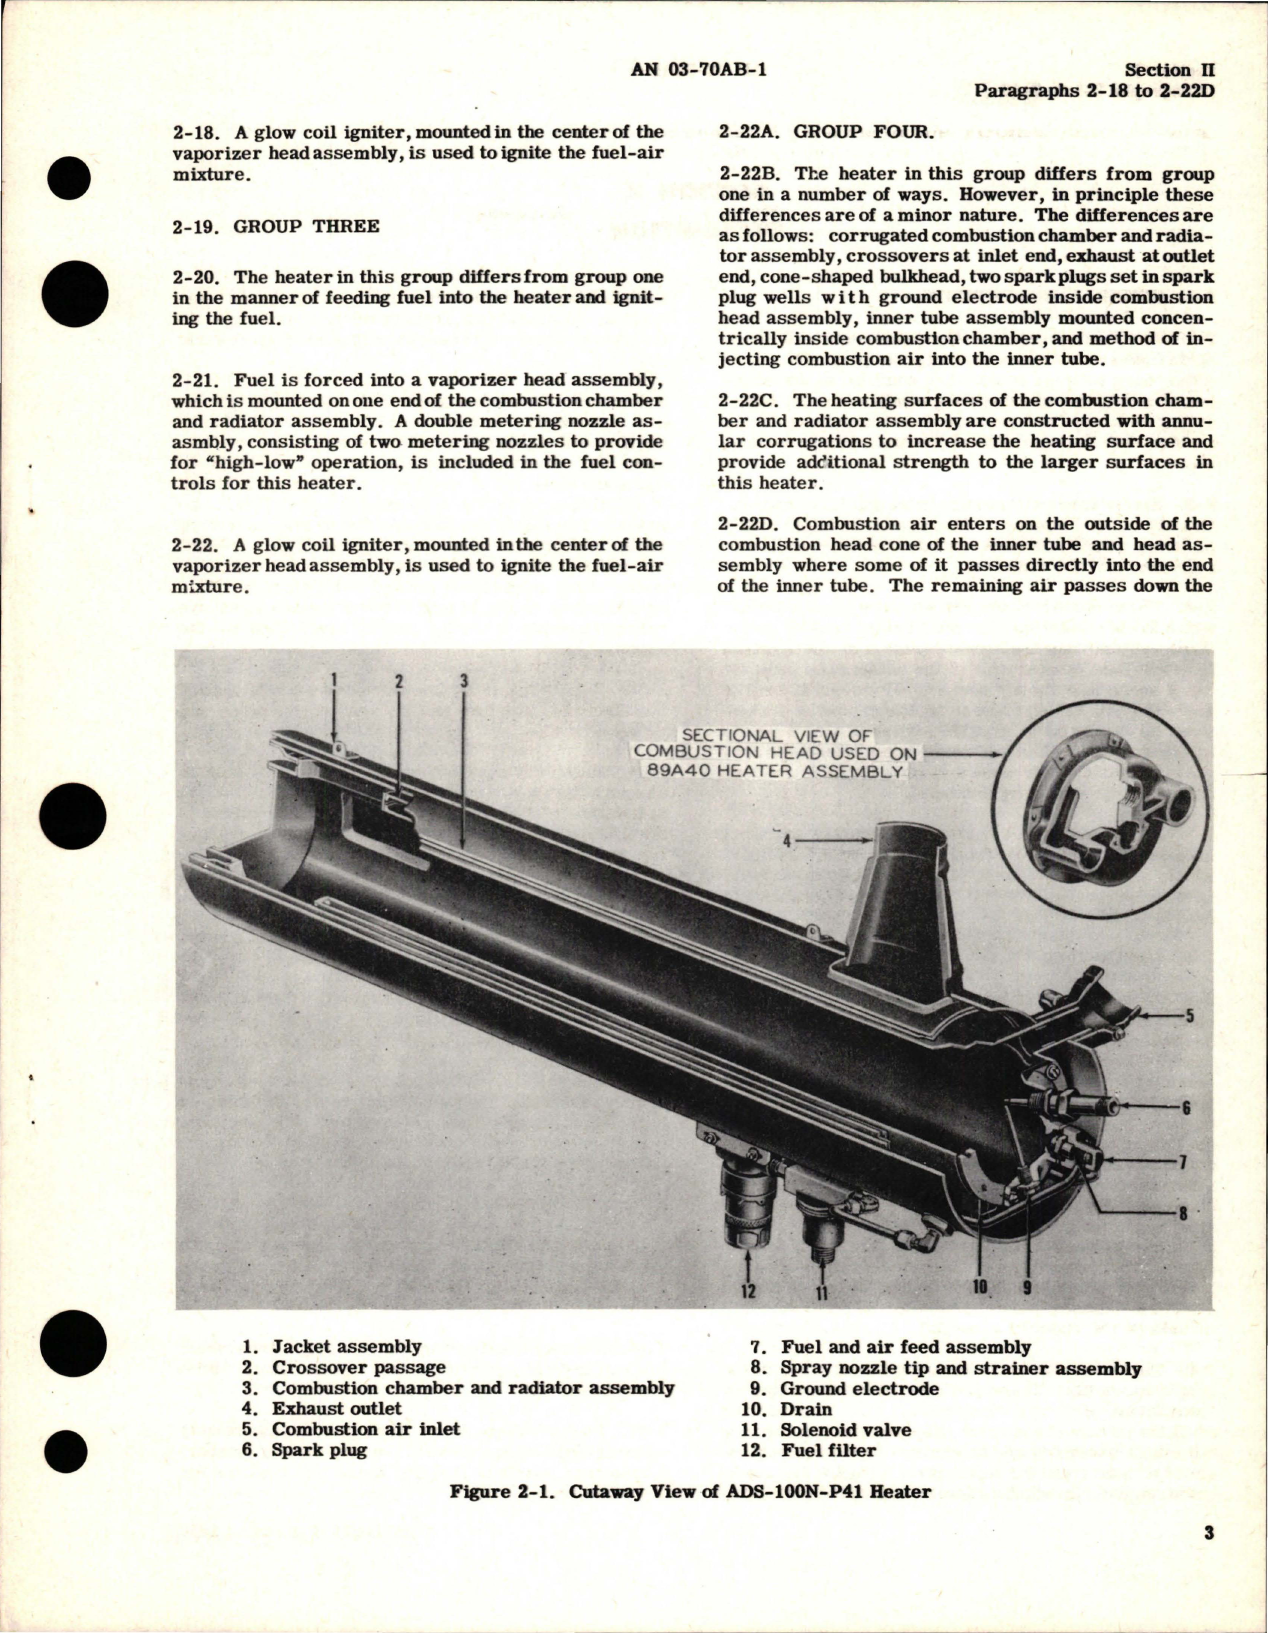 Sample page 7 from AirCorps Library document: Operation and Service Instructions for Aircraft Heaters 